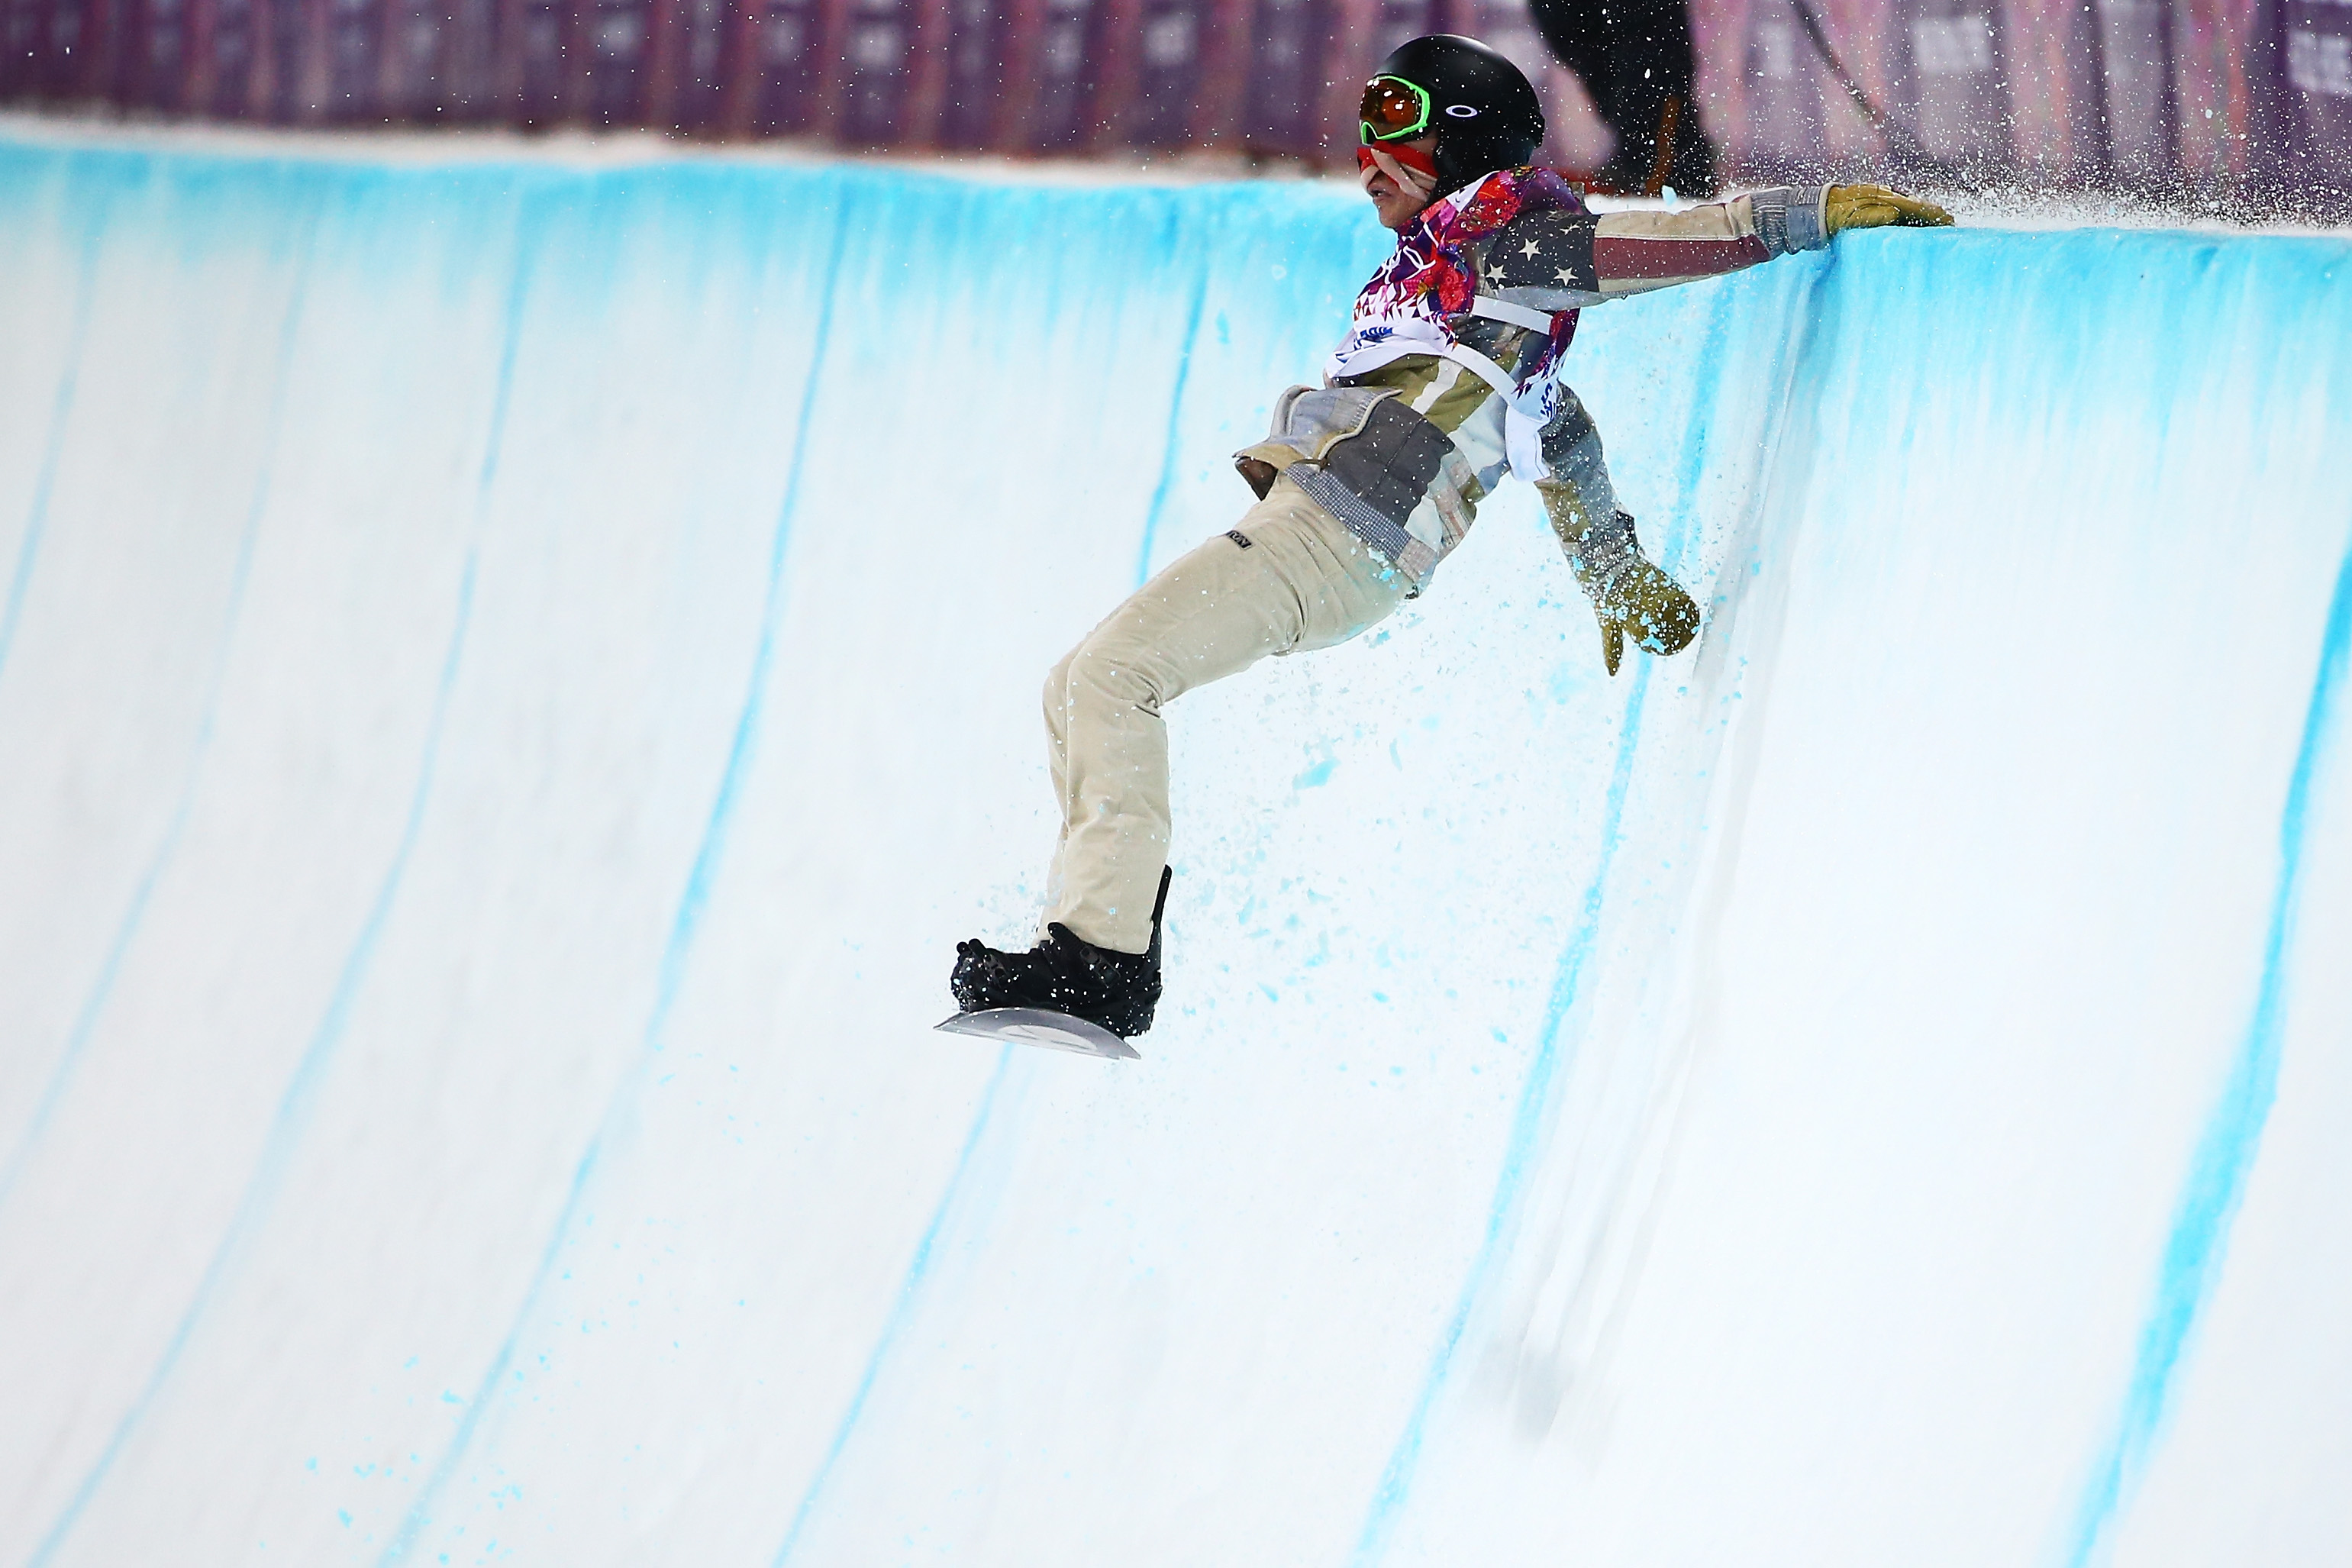 Shaun White entered in first slopestyle event since Sochi Olympics